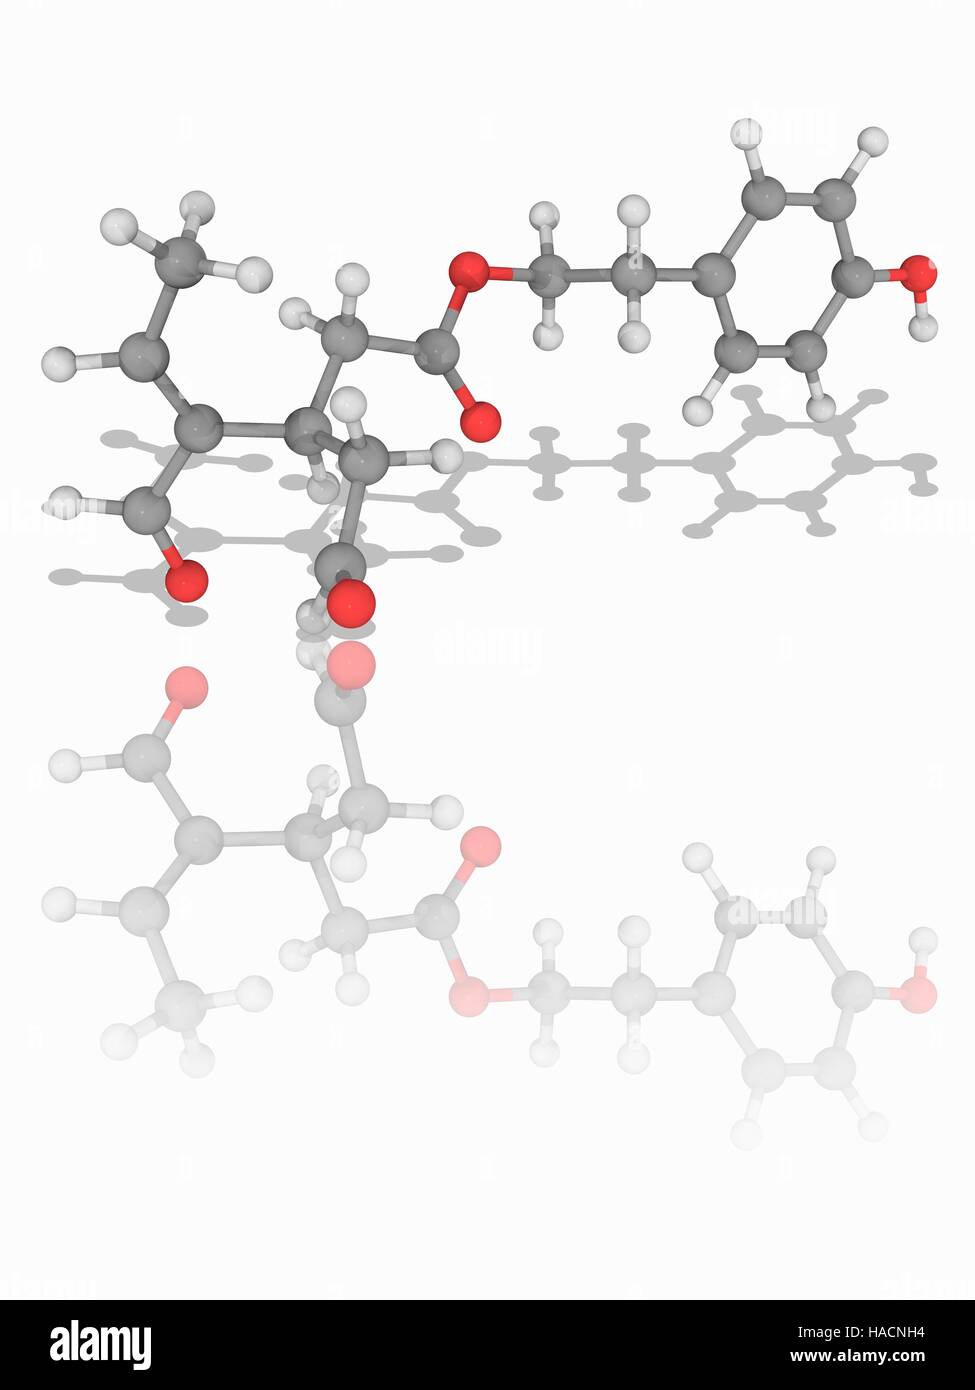 Oleocanthal. Molecular model of the natural organic compound oleocanthal (C17.H20.O5), a phenylethanoid found in extra-virgin olive oil. Atoms are represented as spheres and are colour-coded: carbon (grey), hydrogen (white) and oxygen (red). Illustration. Stock Photo